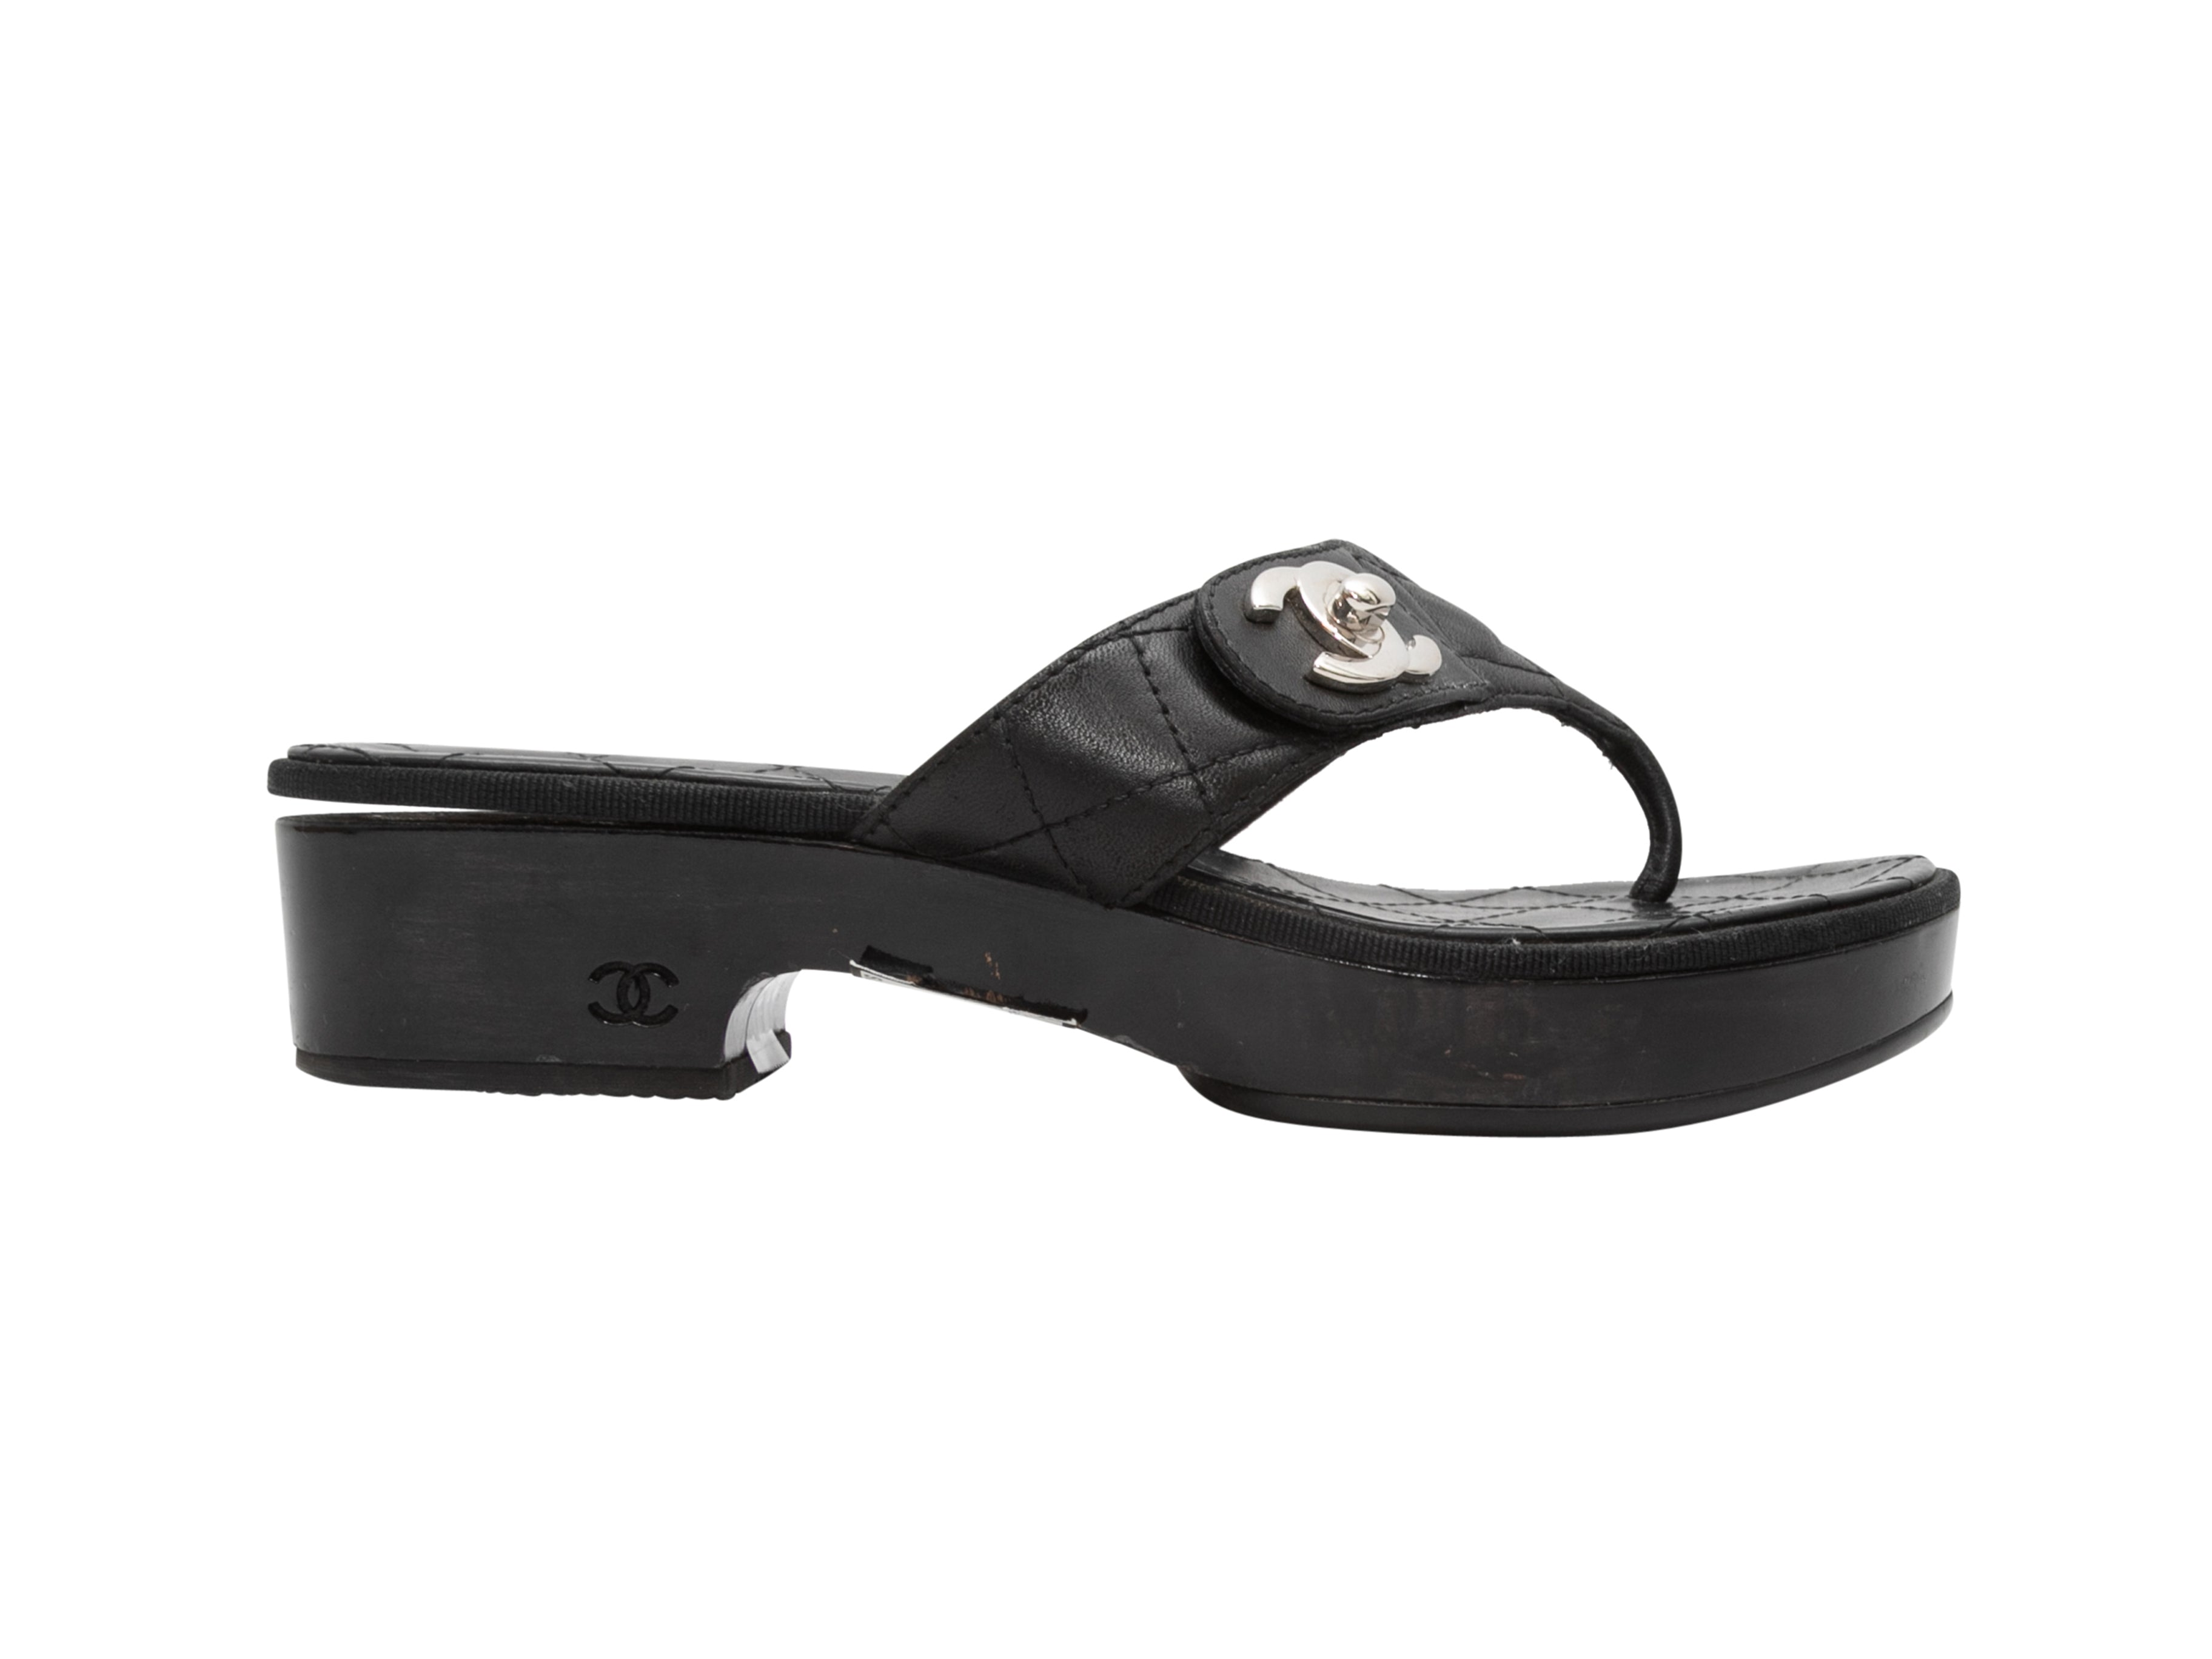 Chanel Large Cc Silver Tone Logo Leather Wedge Ankle Strap (39.5) Black  Sandals. Get the must-have sandals of t…